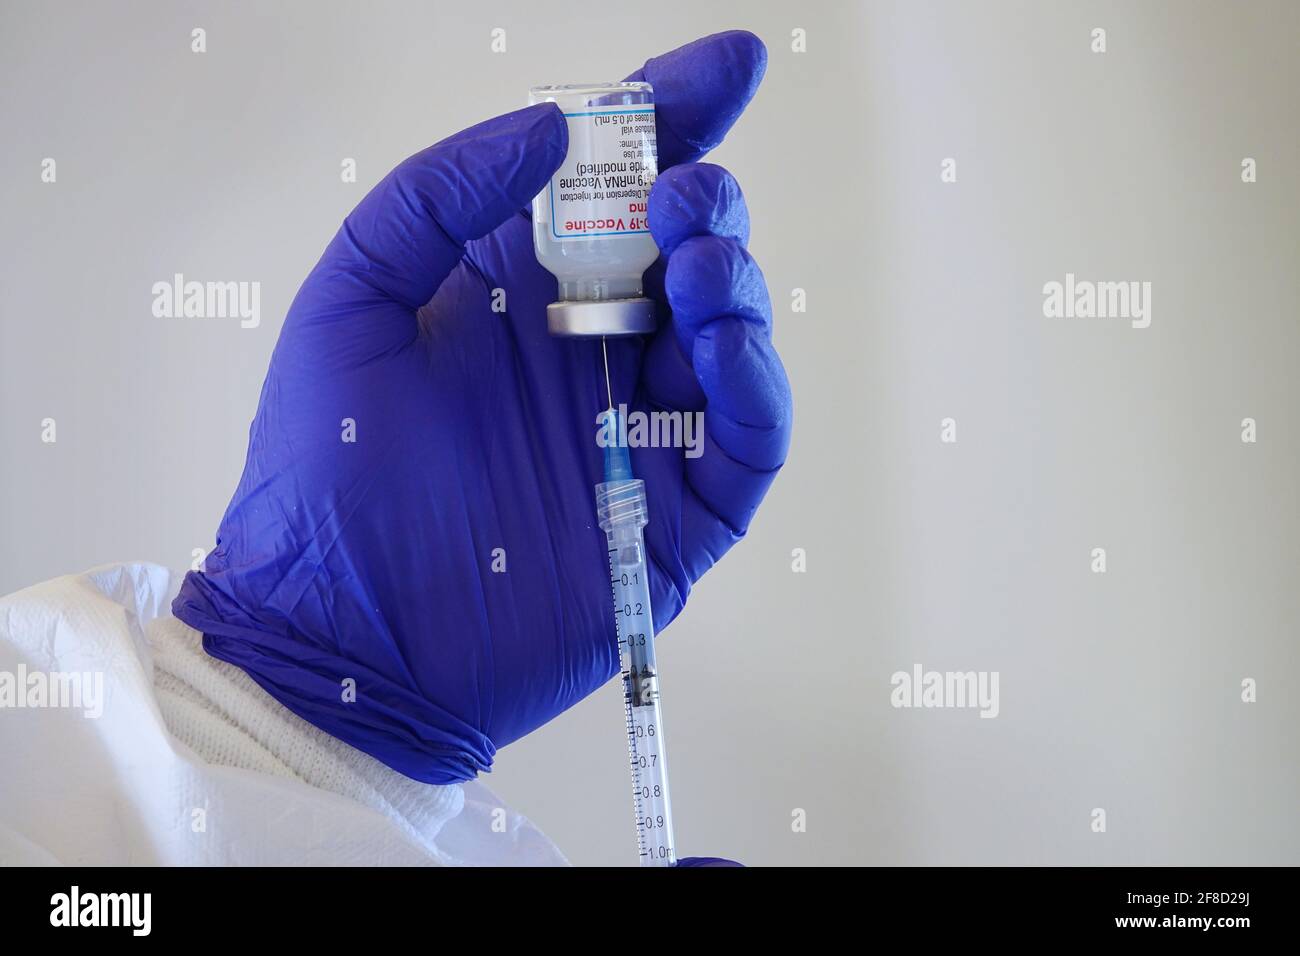 Close up of a vial of Moderna Covid-19 vaccine used in an Italian vaccination centre. Turin, Italy - April 2021 Stock Photo